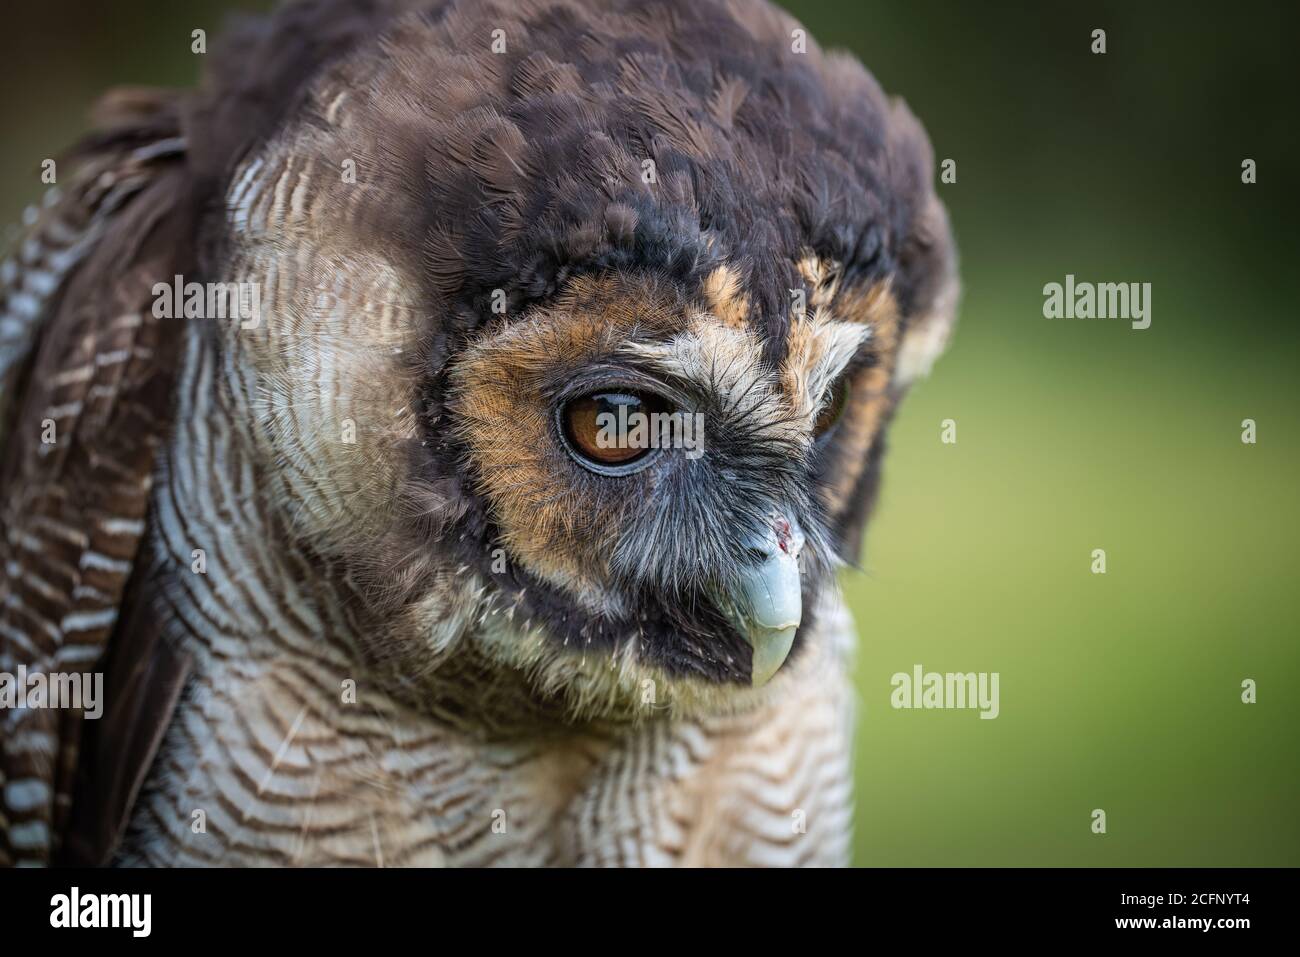 A close up head image of an Asian brown wood owl Strix leptogrammica. It is looking down with eyes wide open Stock Photo